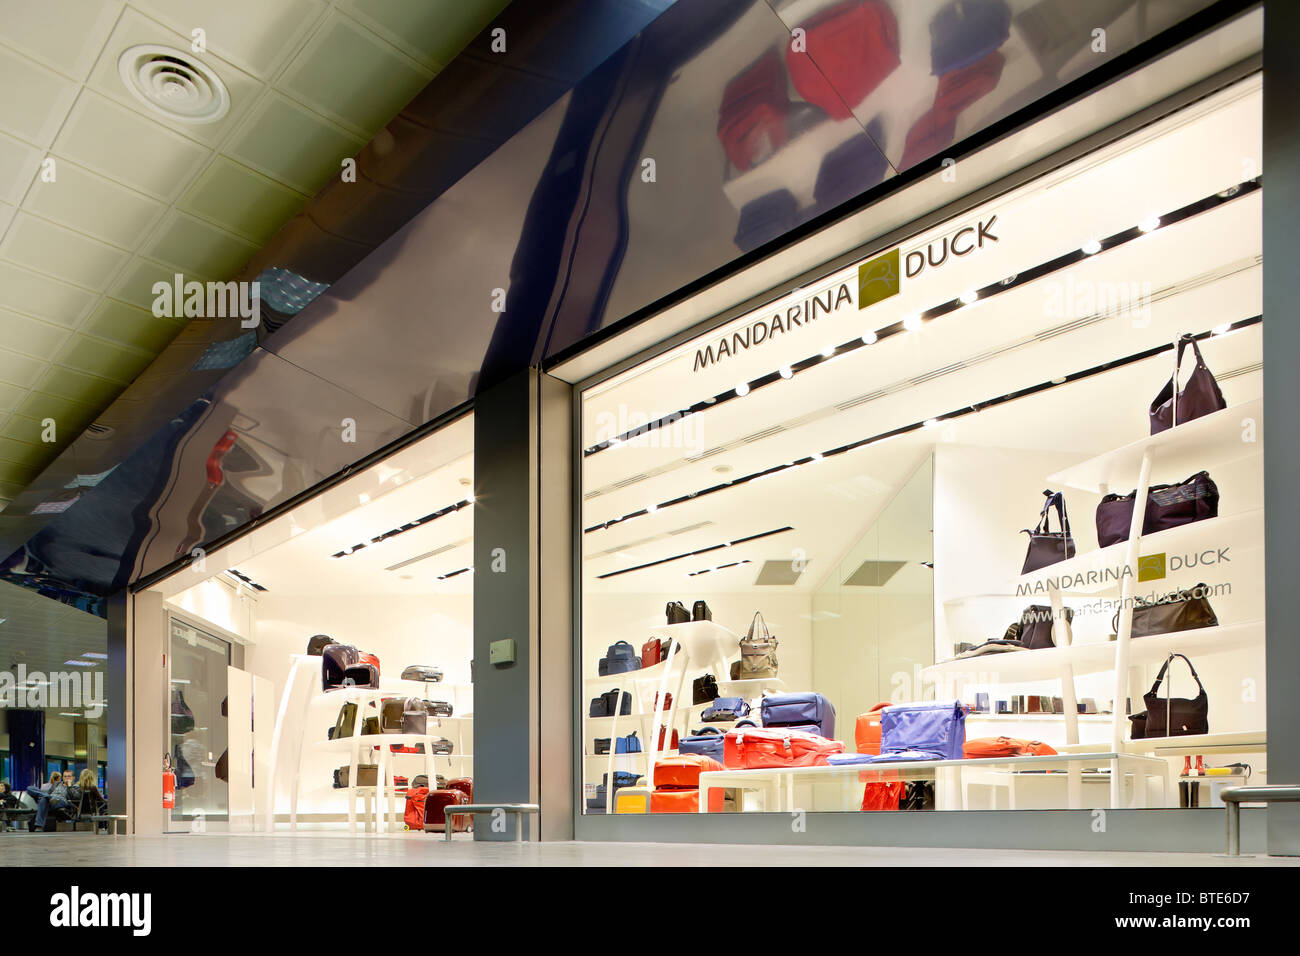 Mandarina Duck shop store in the departures terminal shopping mall at Guglielmo Marconi airport Bologna Italy Stock Photo